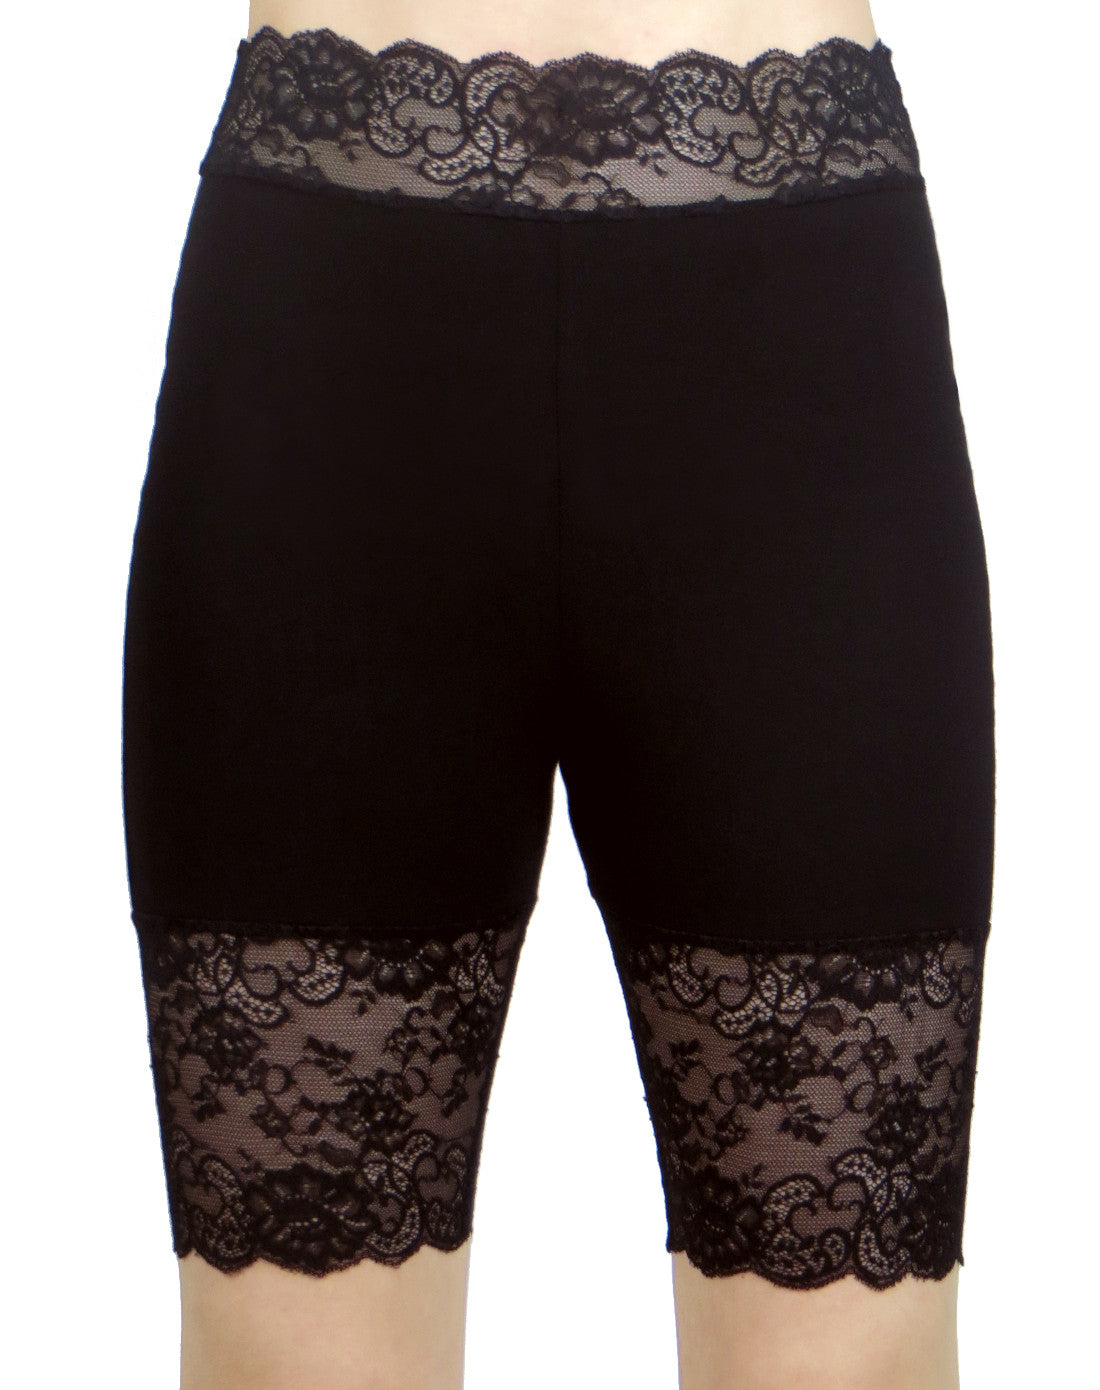 High-Waisted Black Stretch Lace Shorts cotton spandex plus size ...